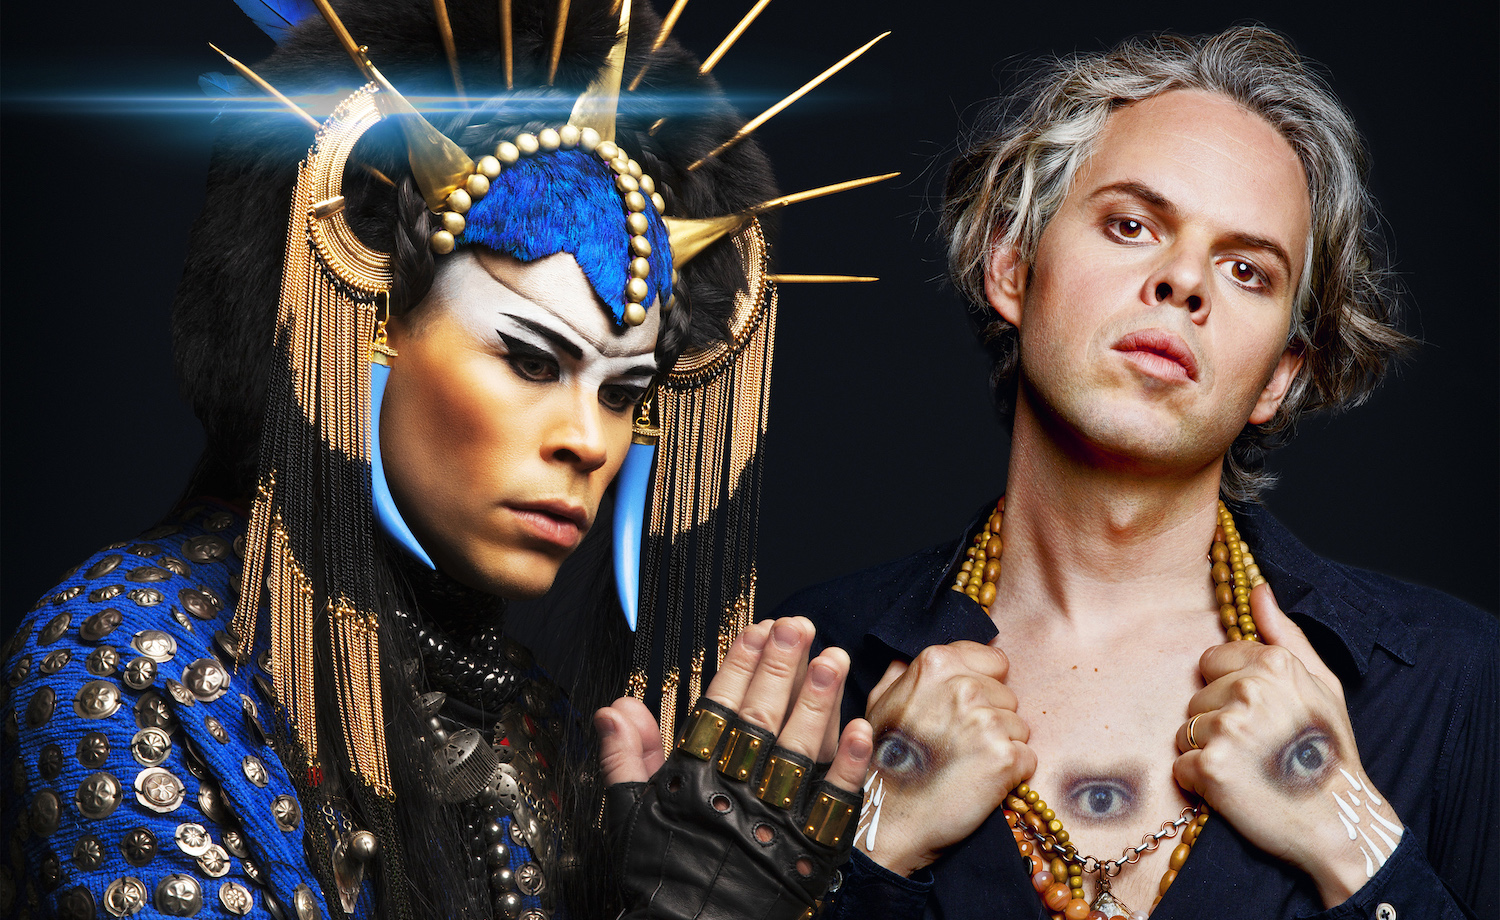 TikTok breathes new life into 12-year-old Empire Of The Sun classic